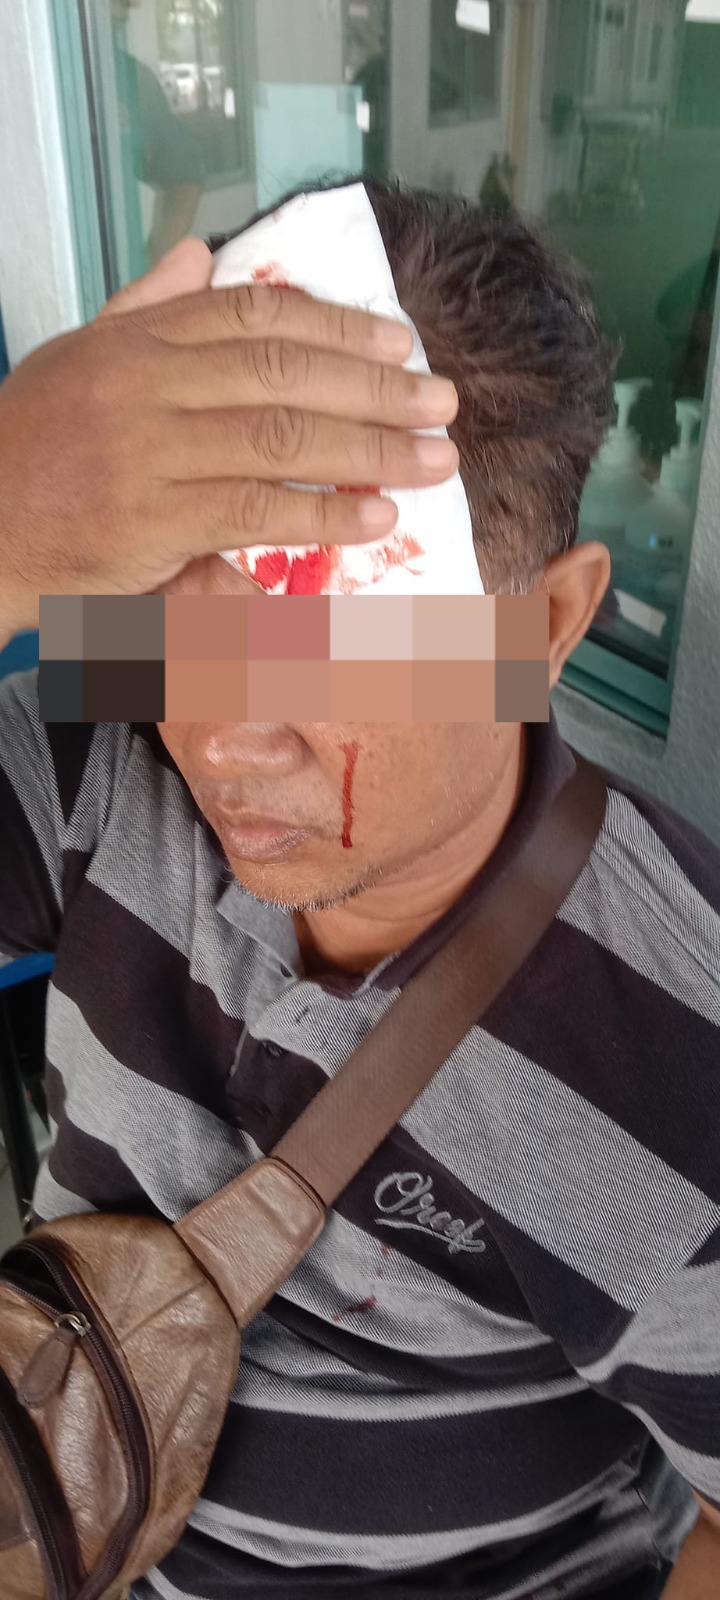 Msian man injured his head after a pole falls on him